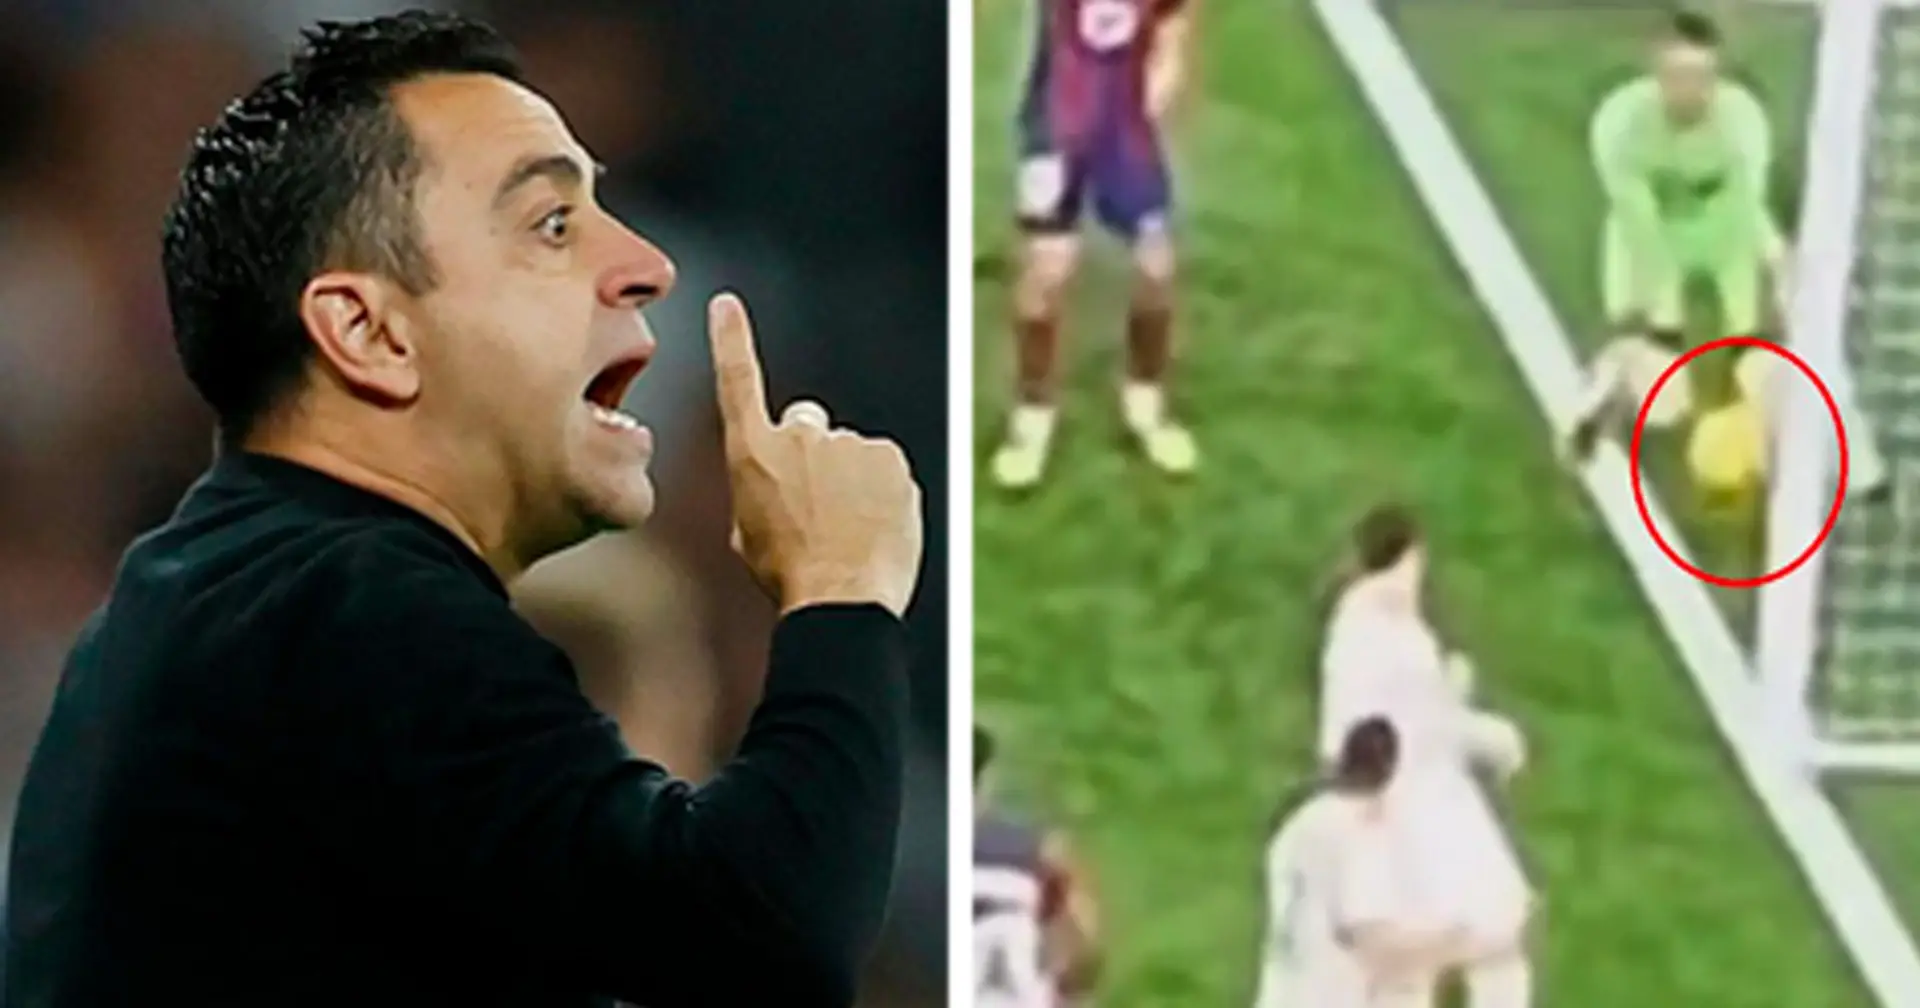 'Every damn time': Barca fan urges Xavi to stop his annoying narrative after games